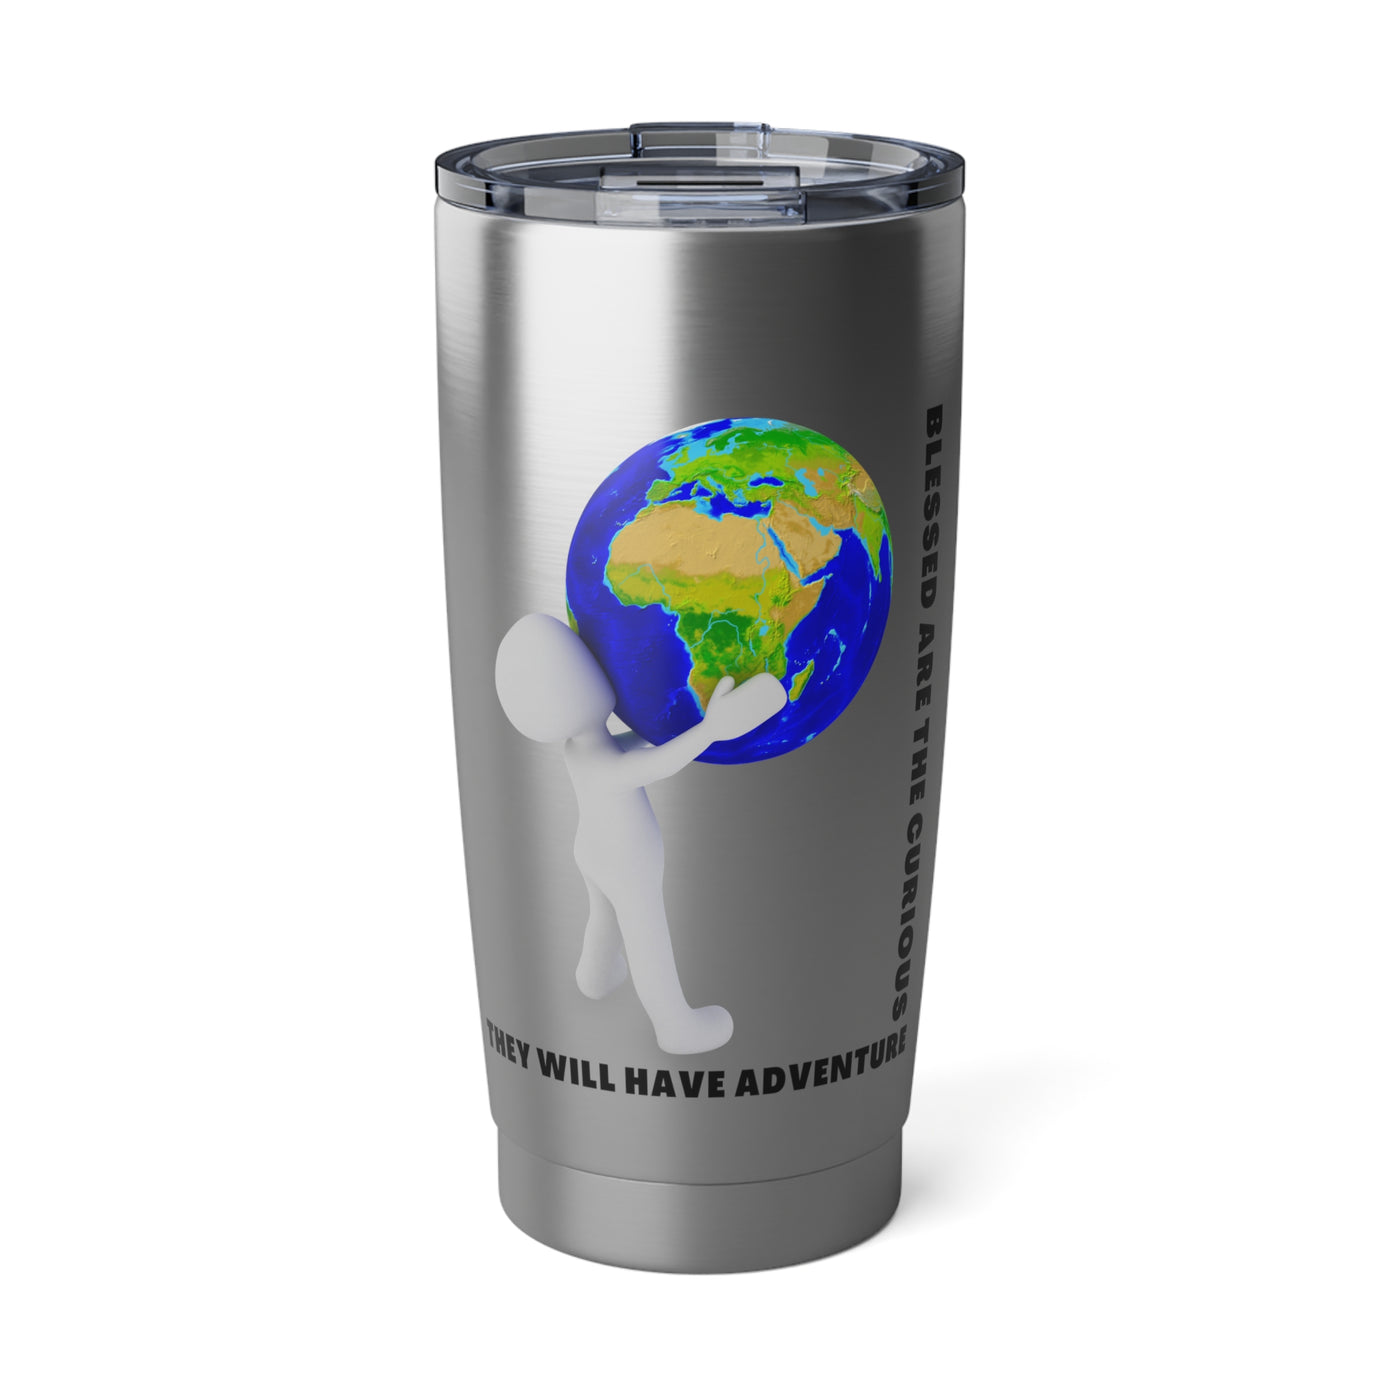 Blessed are the curious they will travel Vagabond 20oz Tumbler